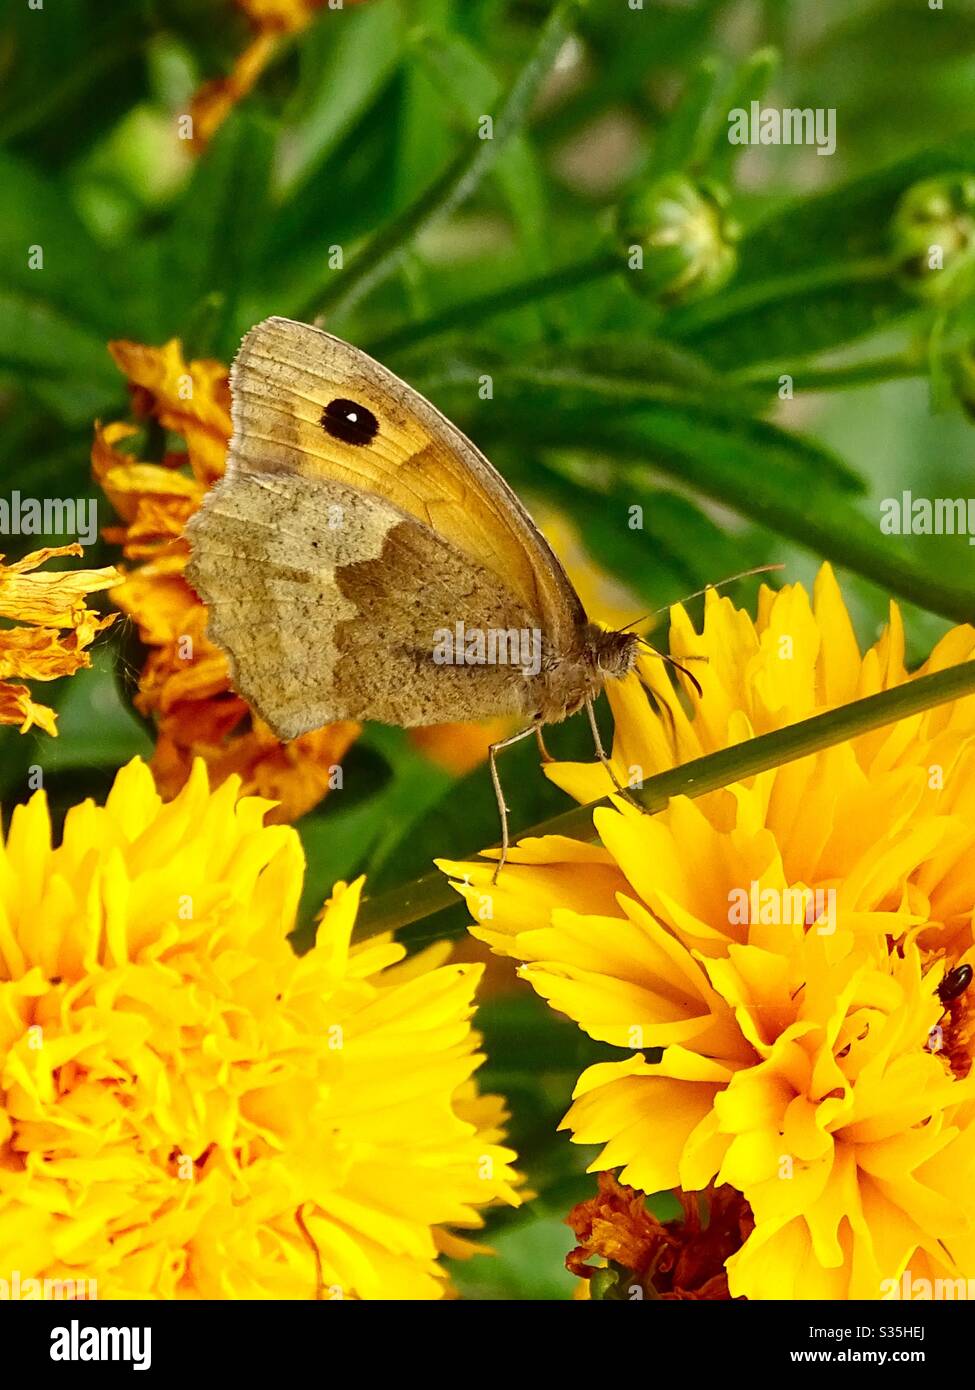 Gatekeeper butterfly on yellow coreopsis flowers in the summer sunshine Stock Photo